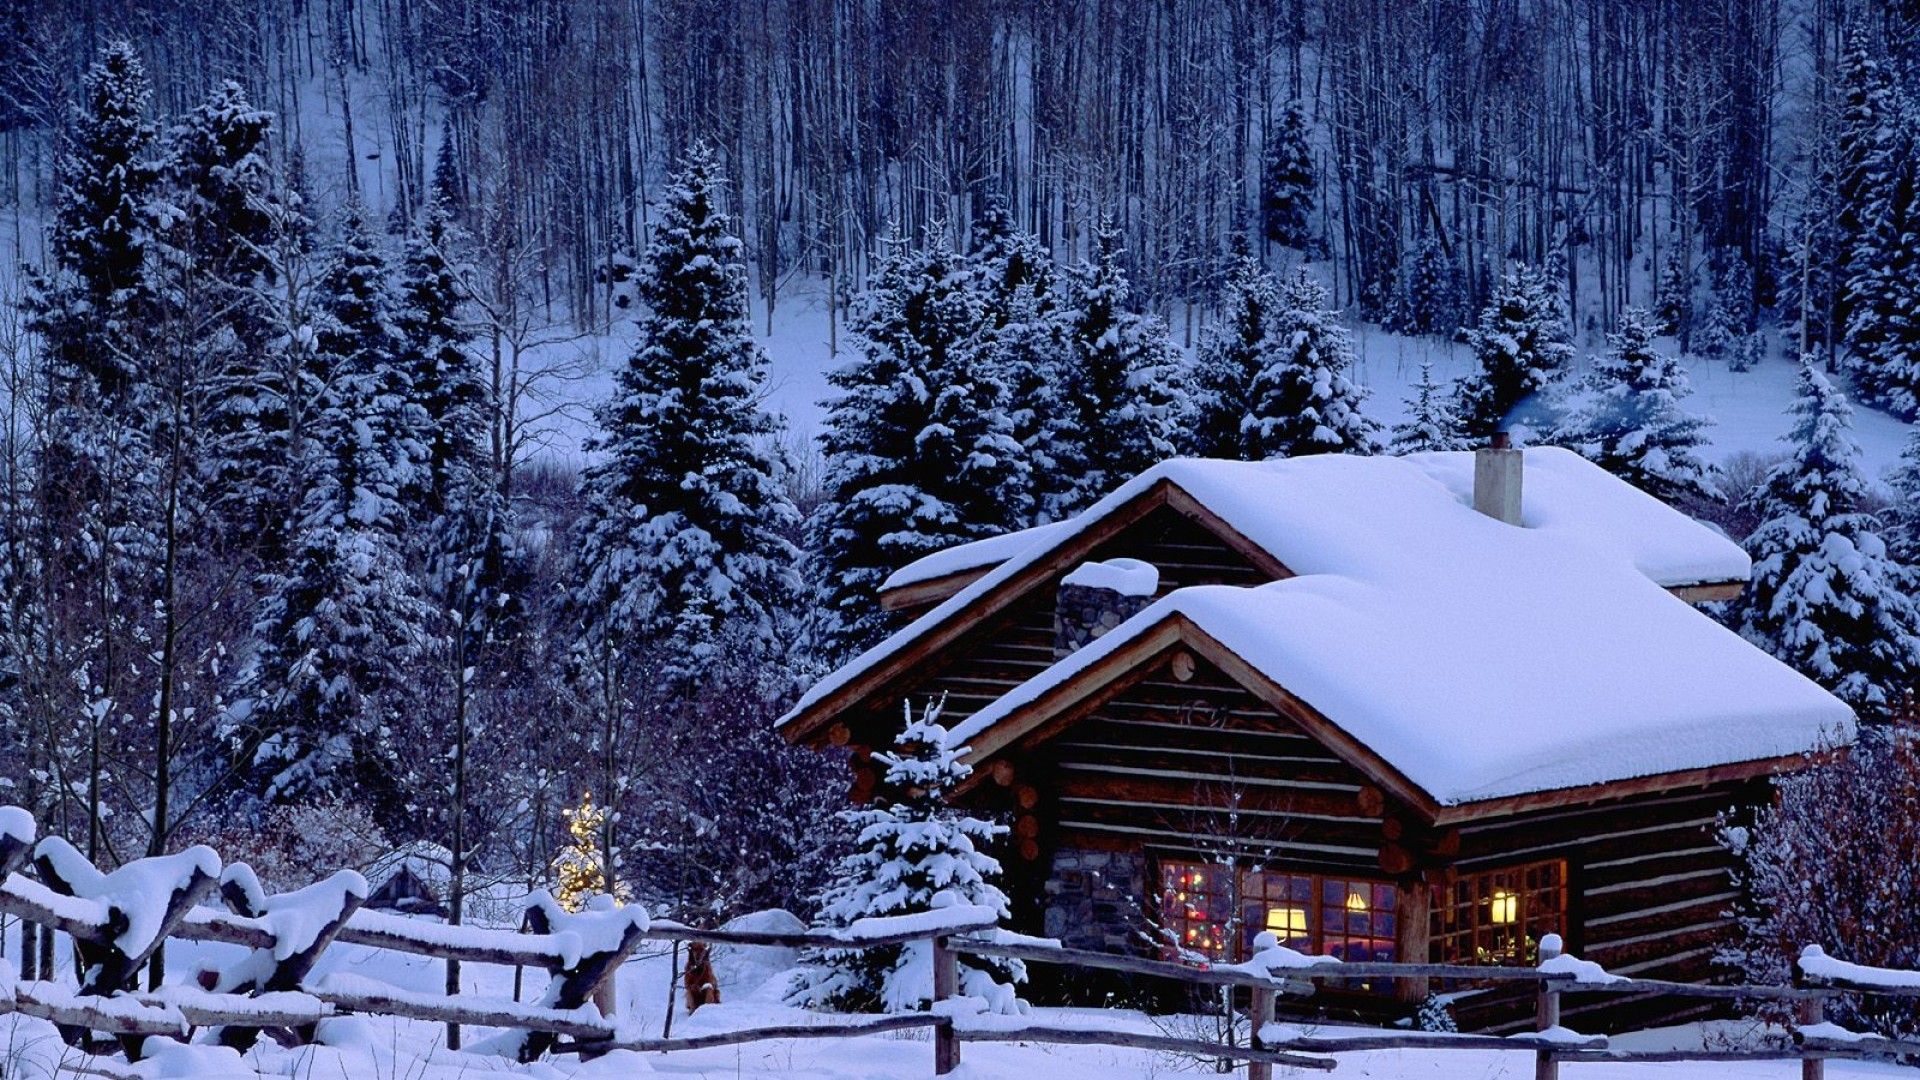 General 1920x1080 Christmas snow pine trees cabin